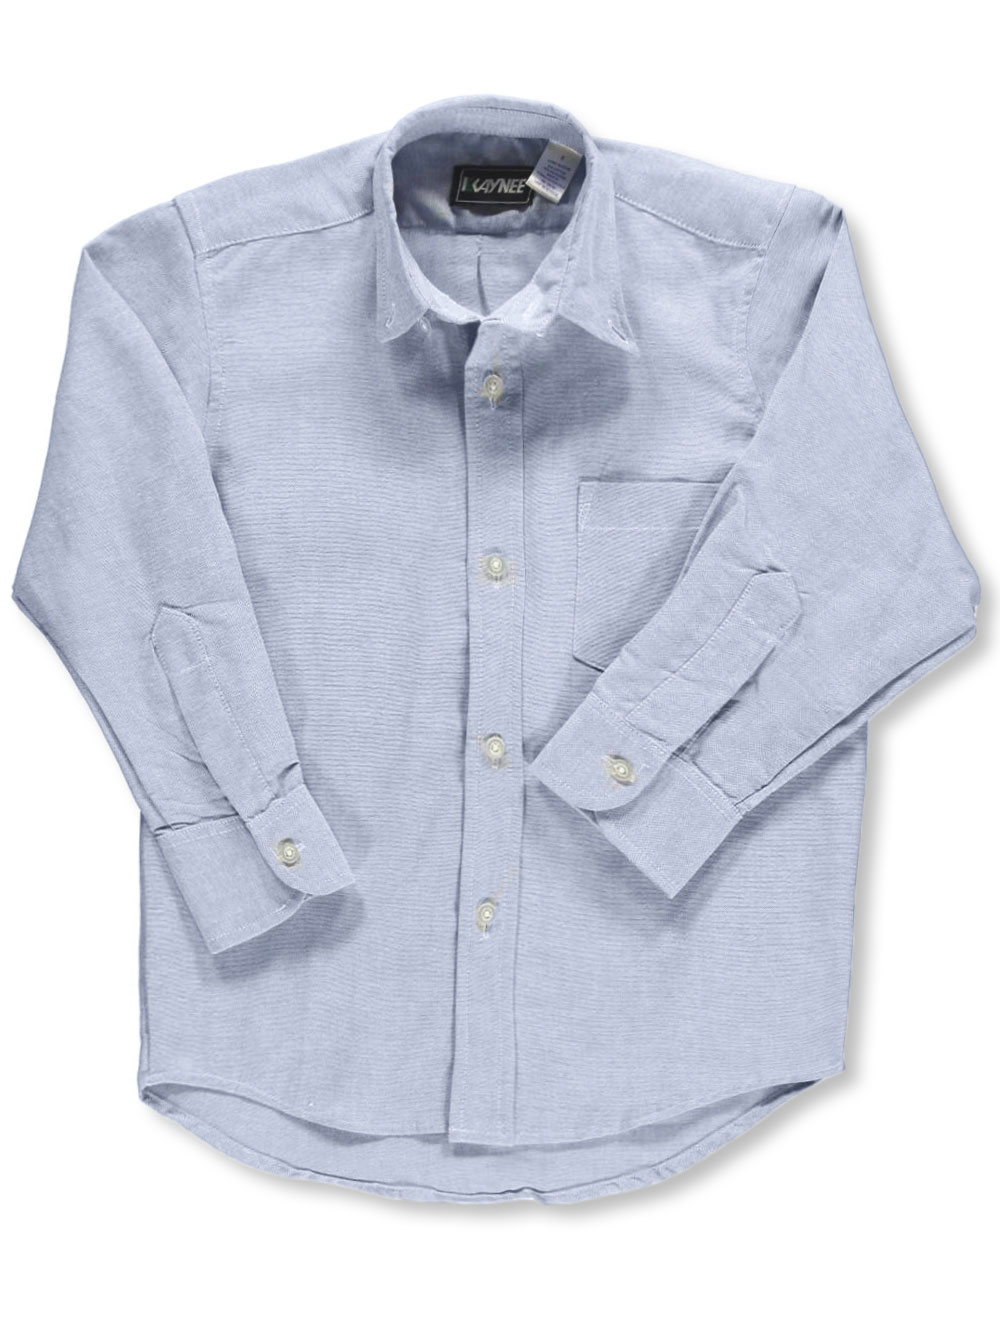 Size 14-16 Button-Downs for Boys